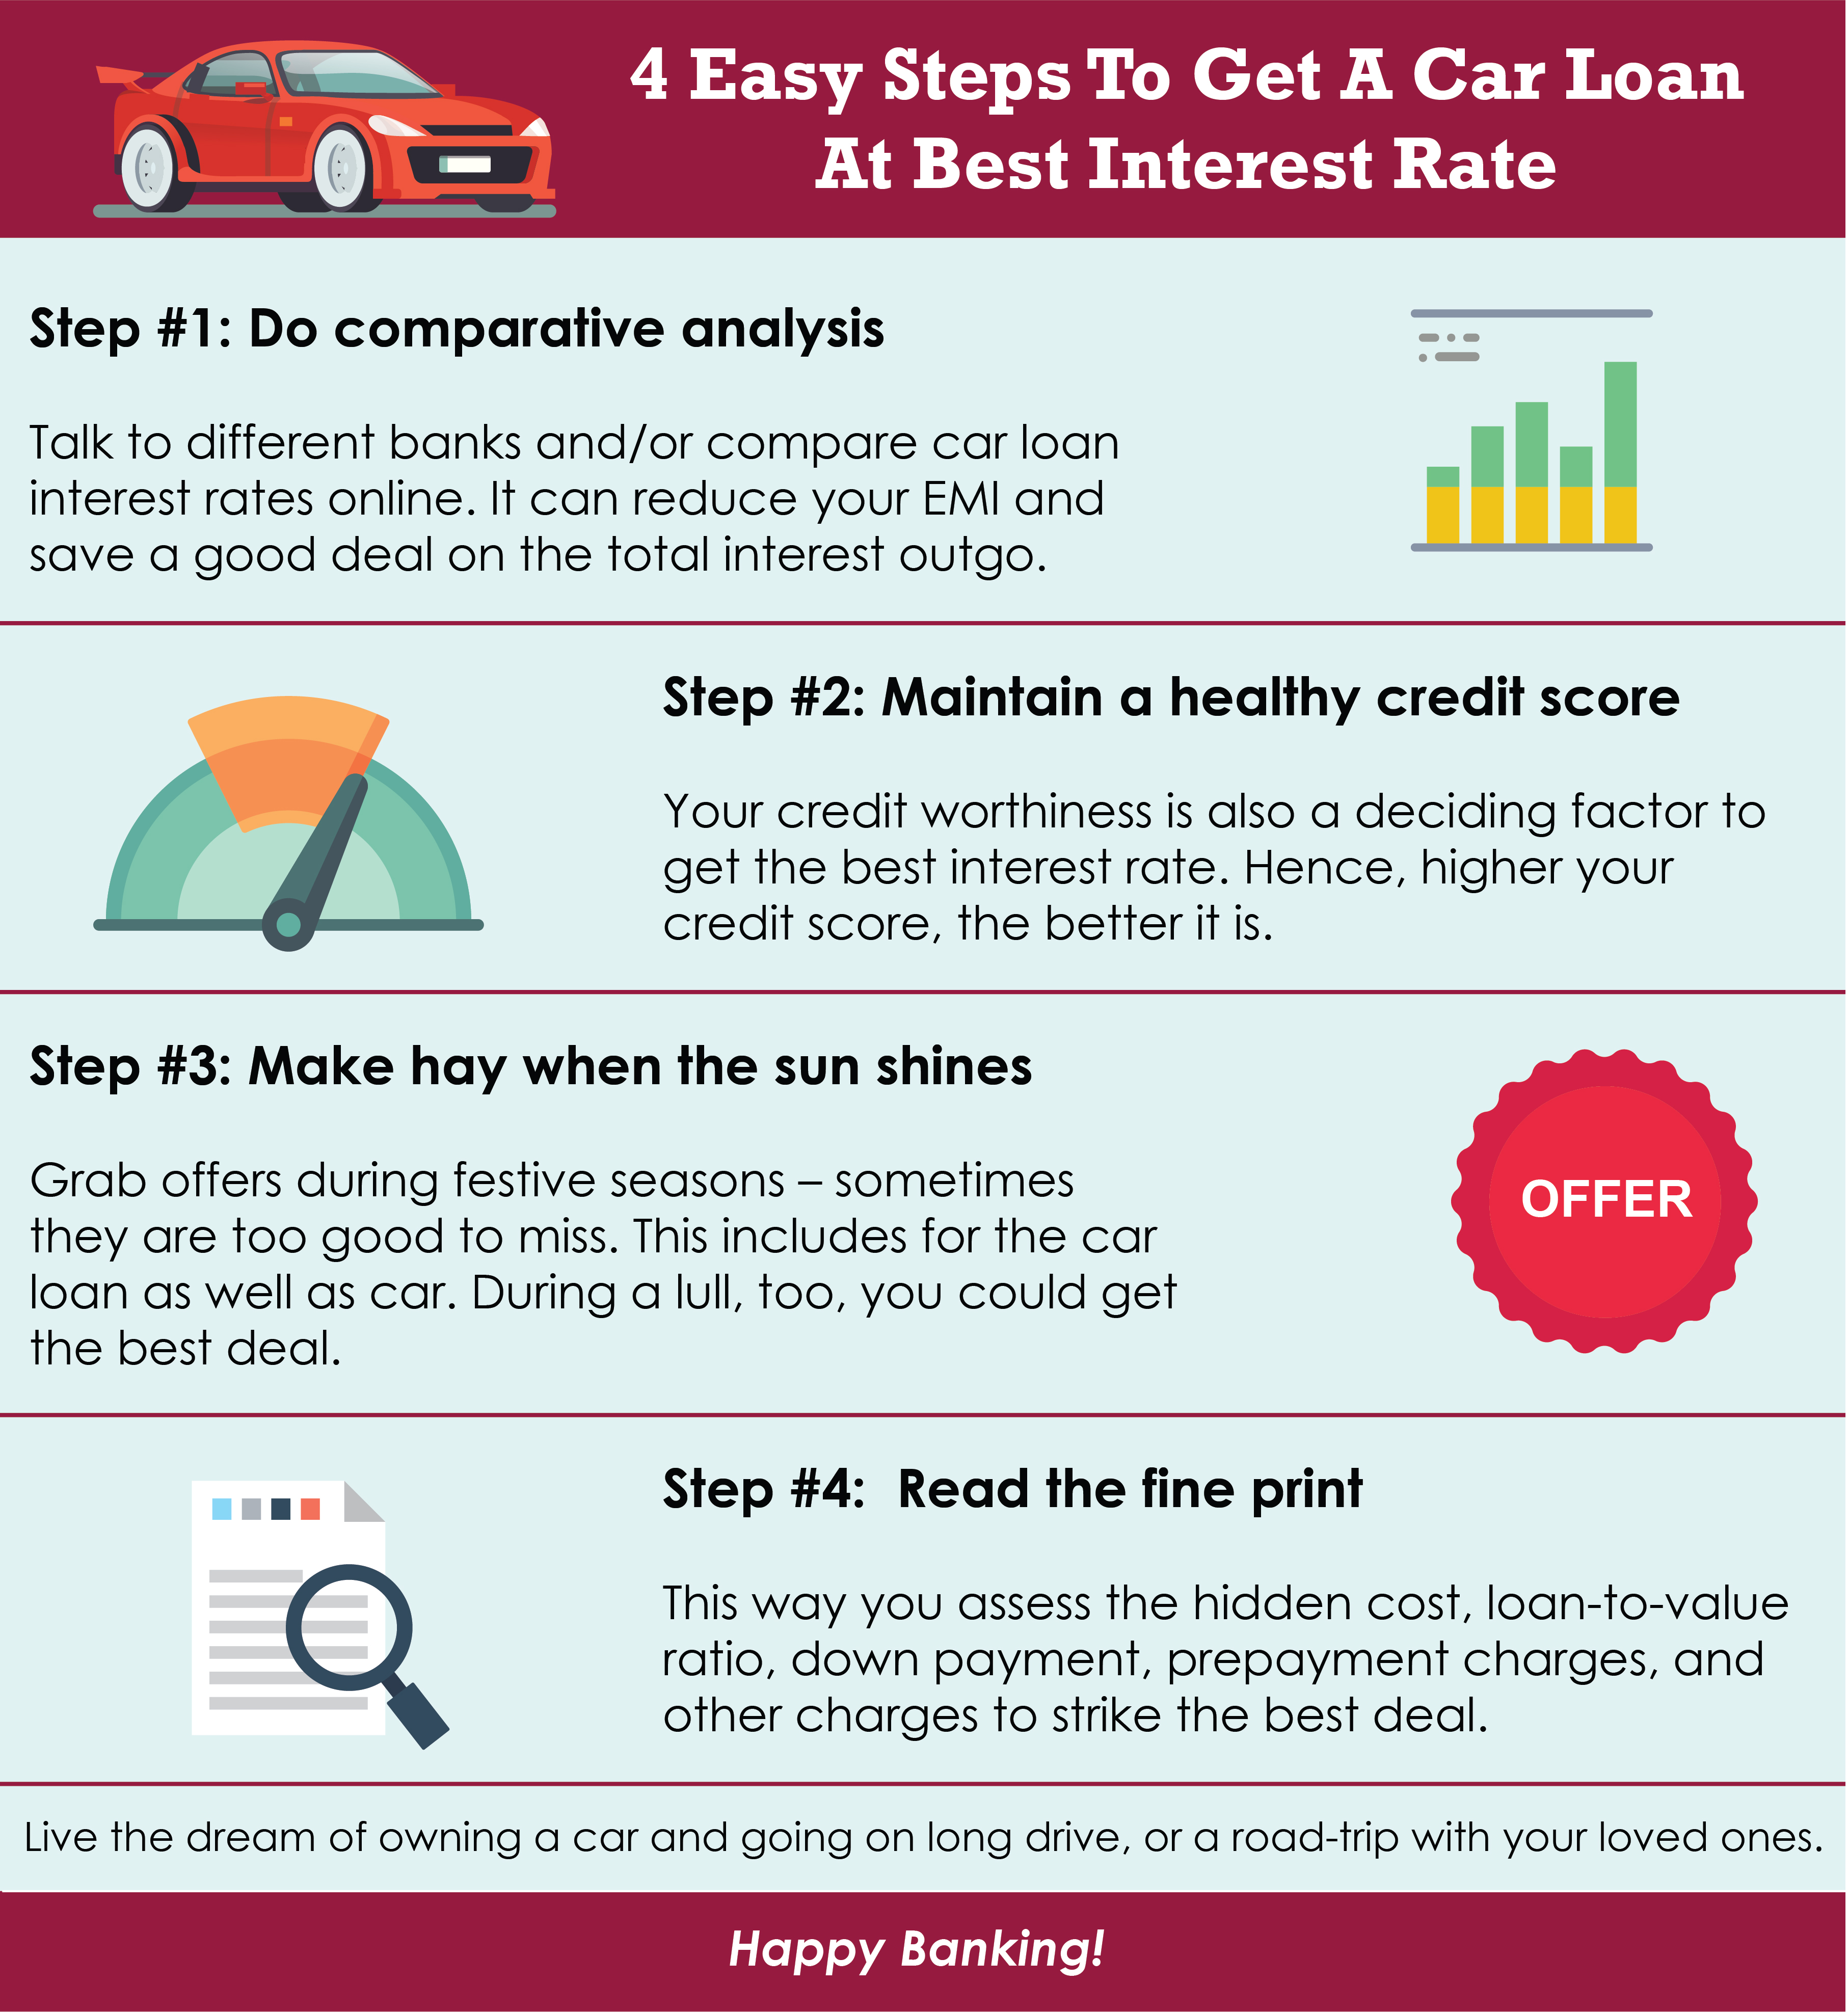 4 Easy Steps To Get A Car Loan At Best Interest Rate-Link 6